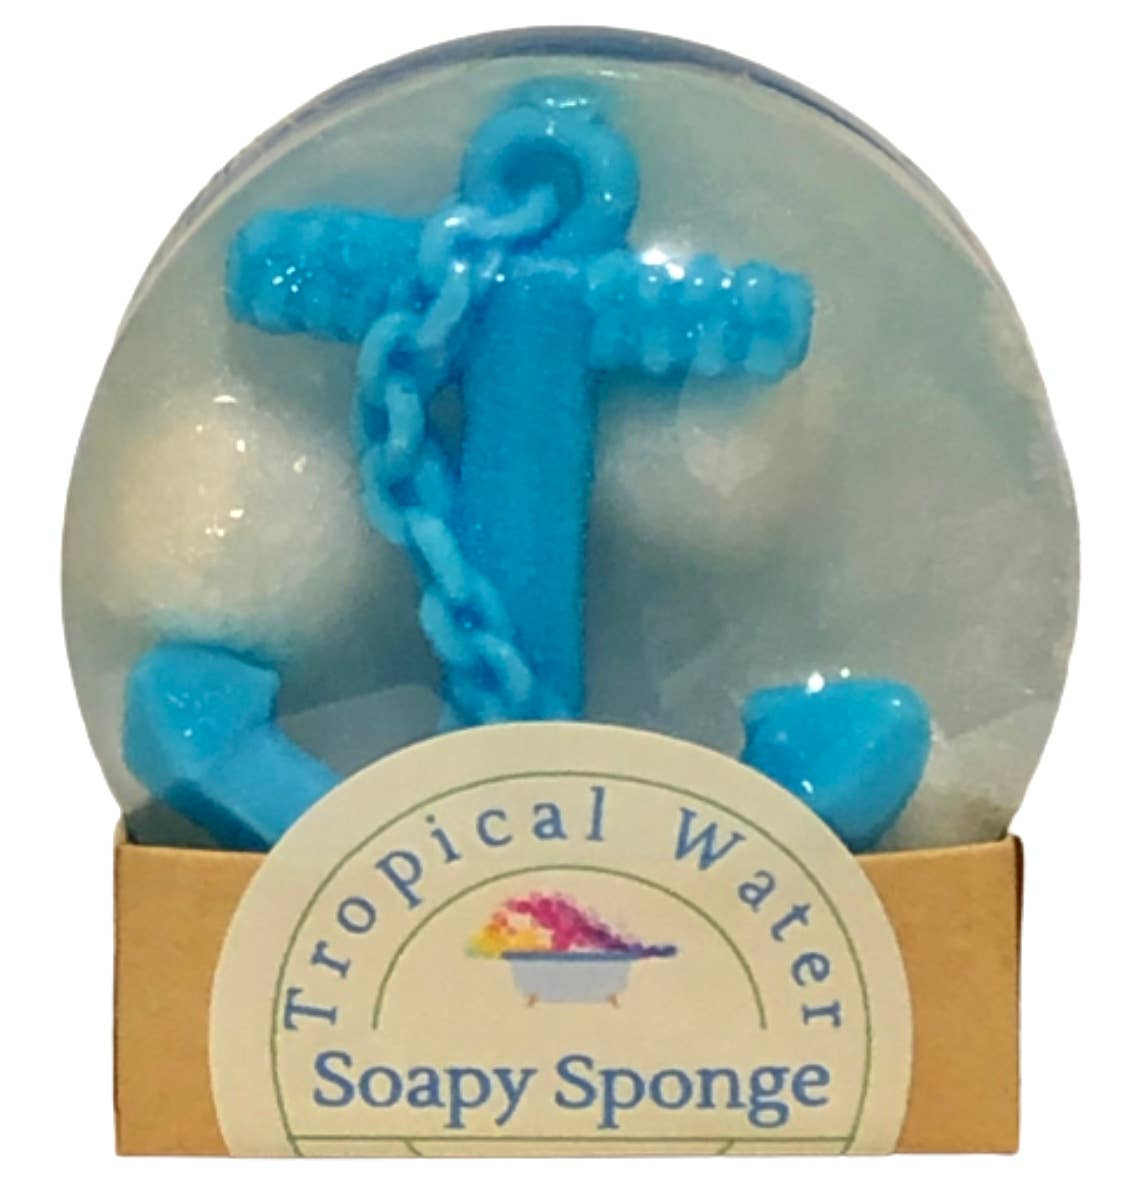 Soapy Sponge Tropical Water